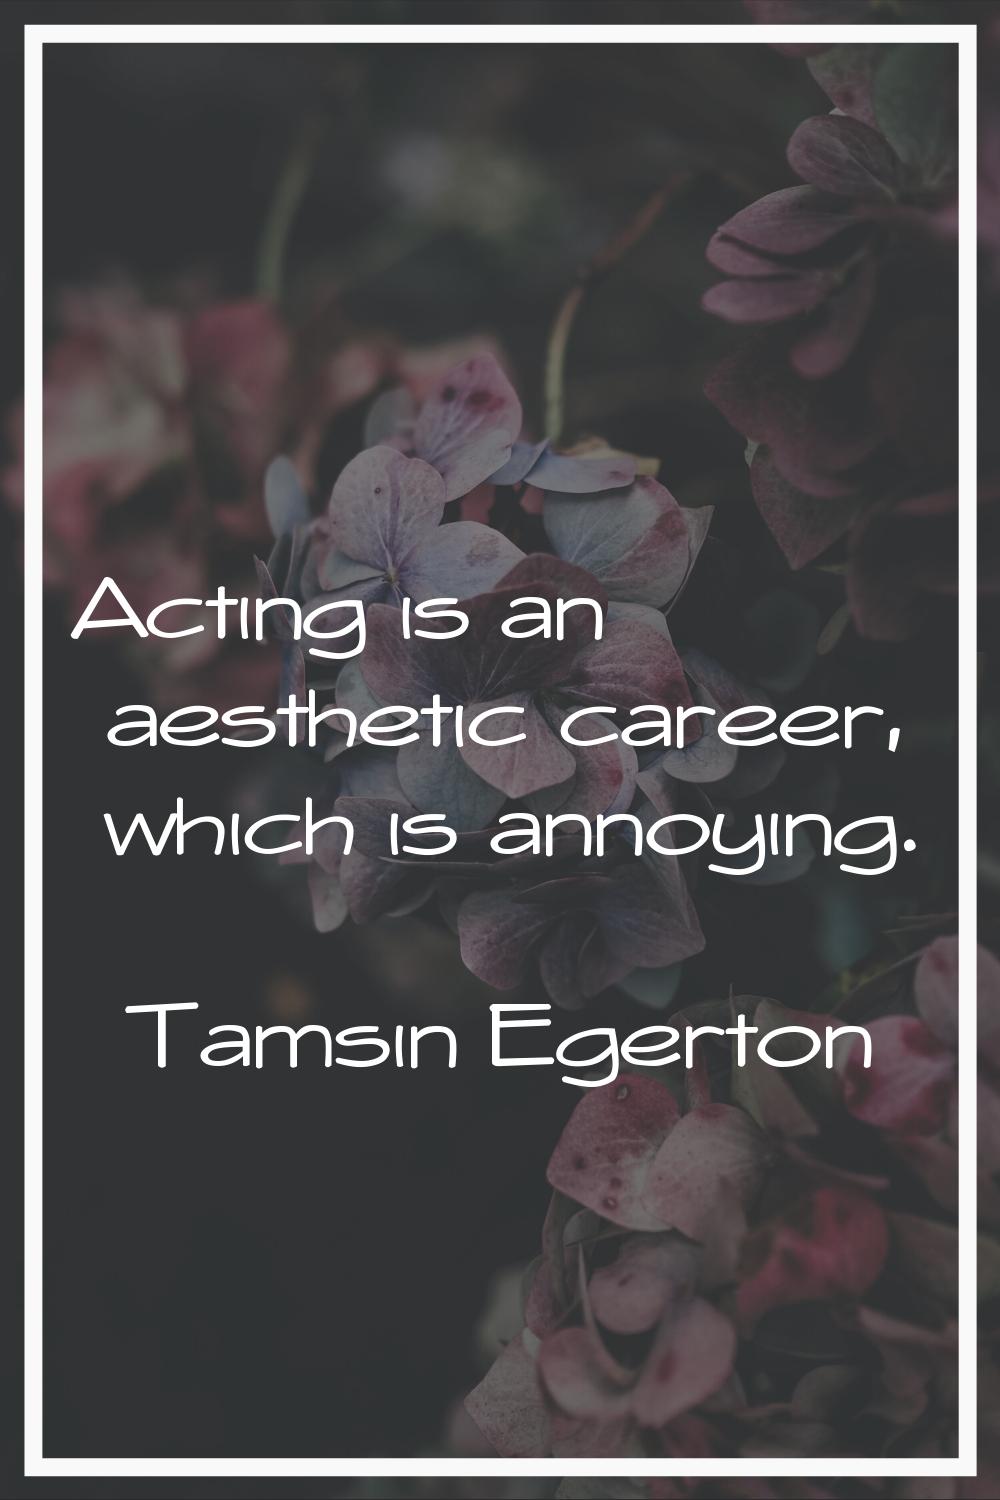 Acting is an aesthetic career, which is annoying.